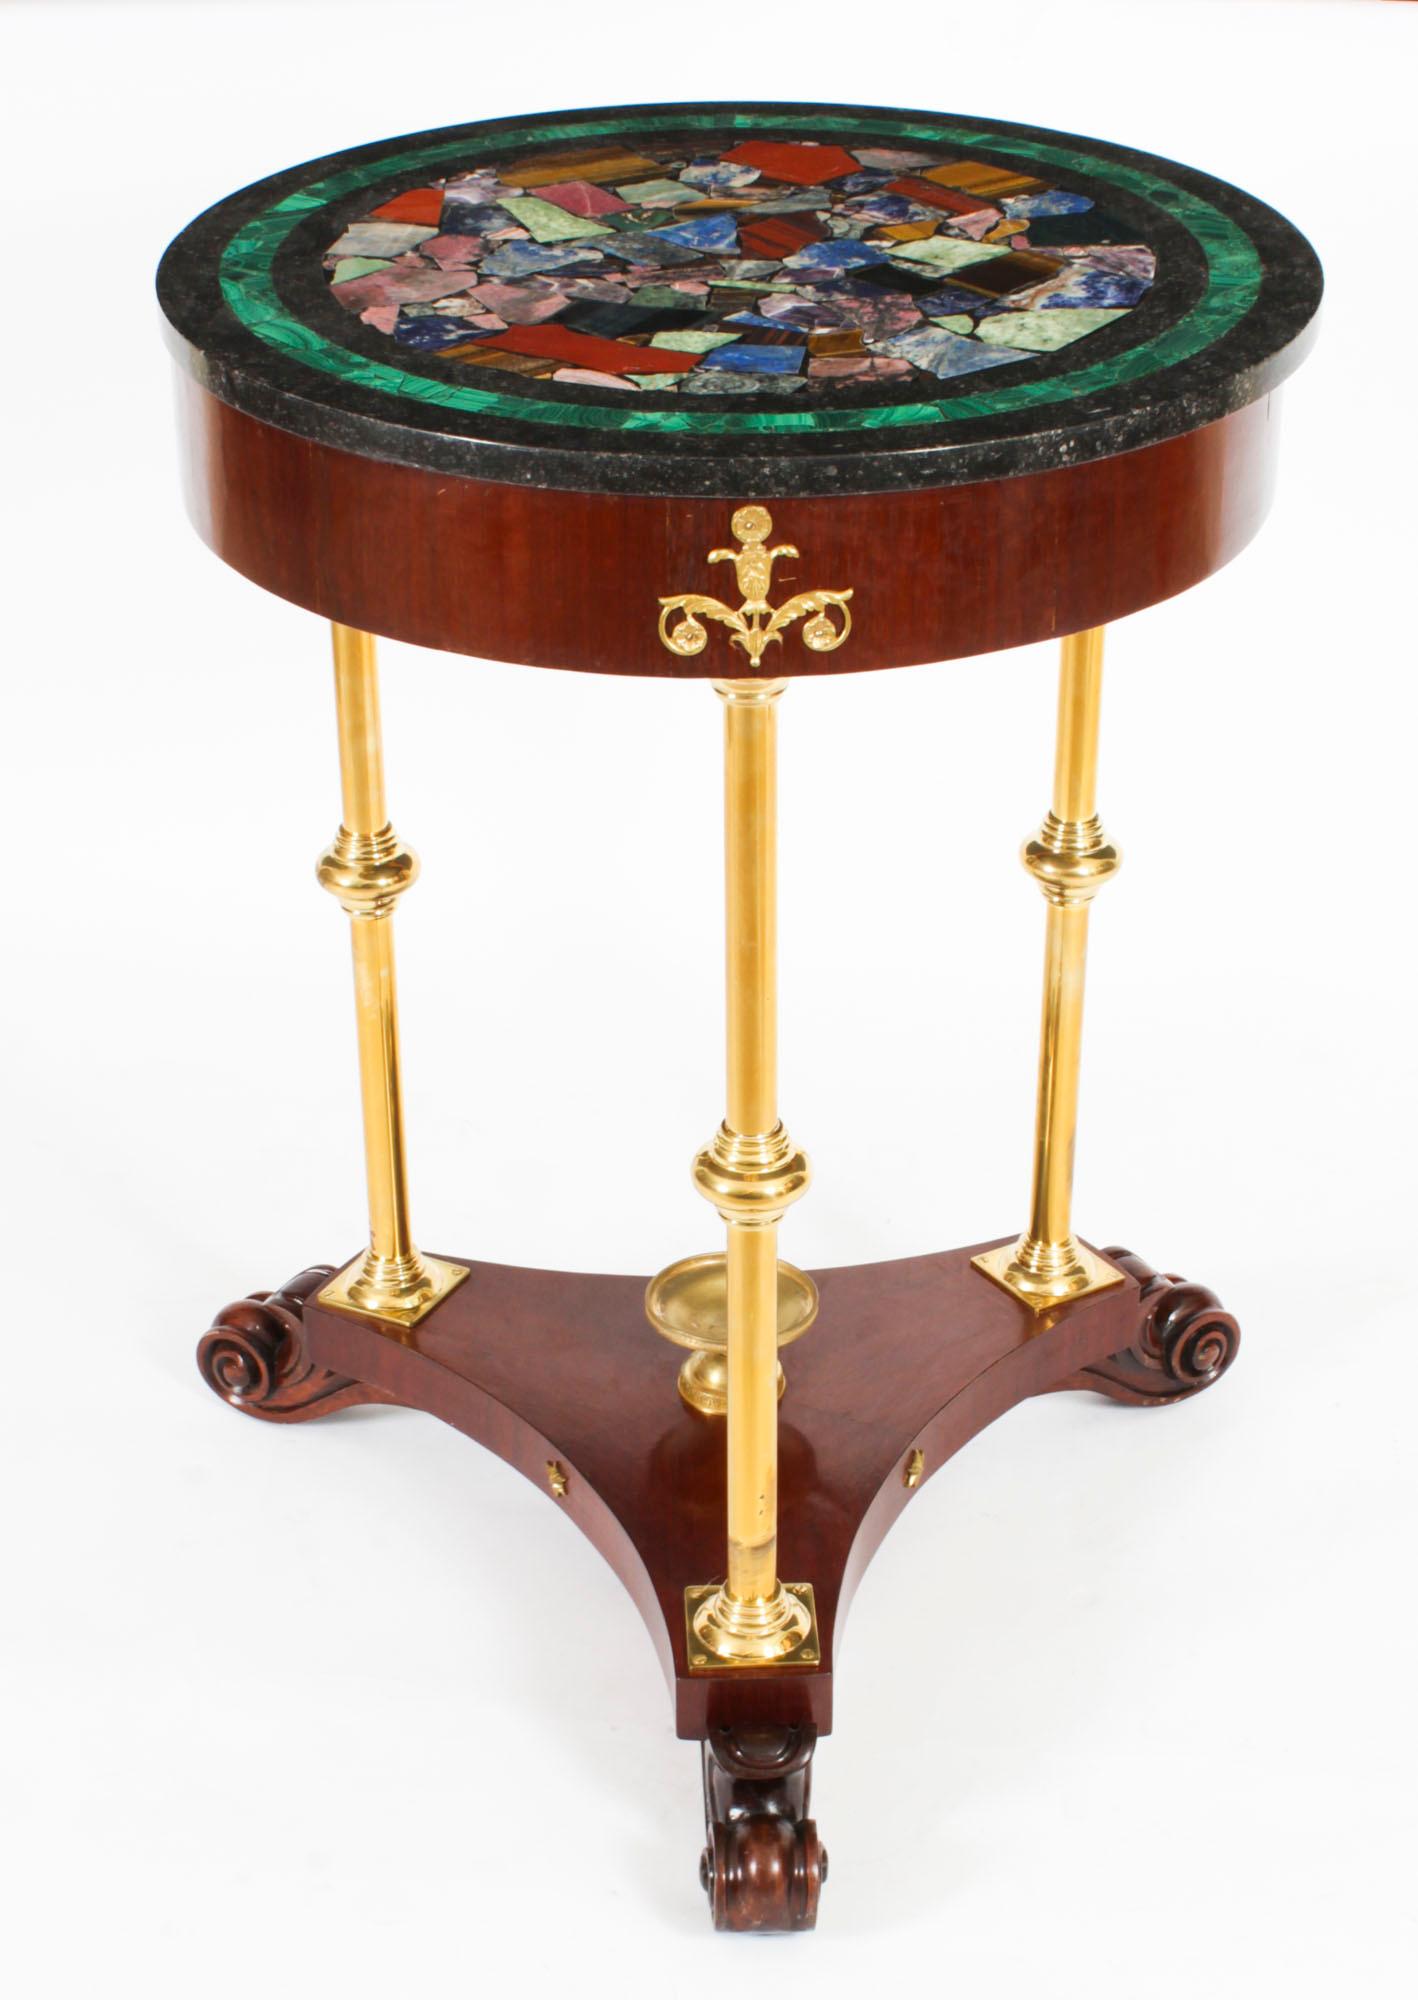 Antique Italian Pietra Dura Occasional Table, Early 20th Century For Sale 12